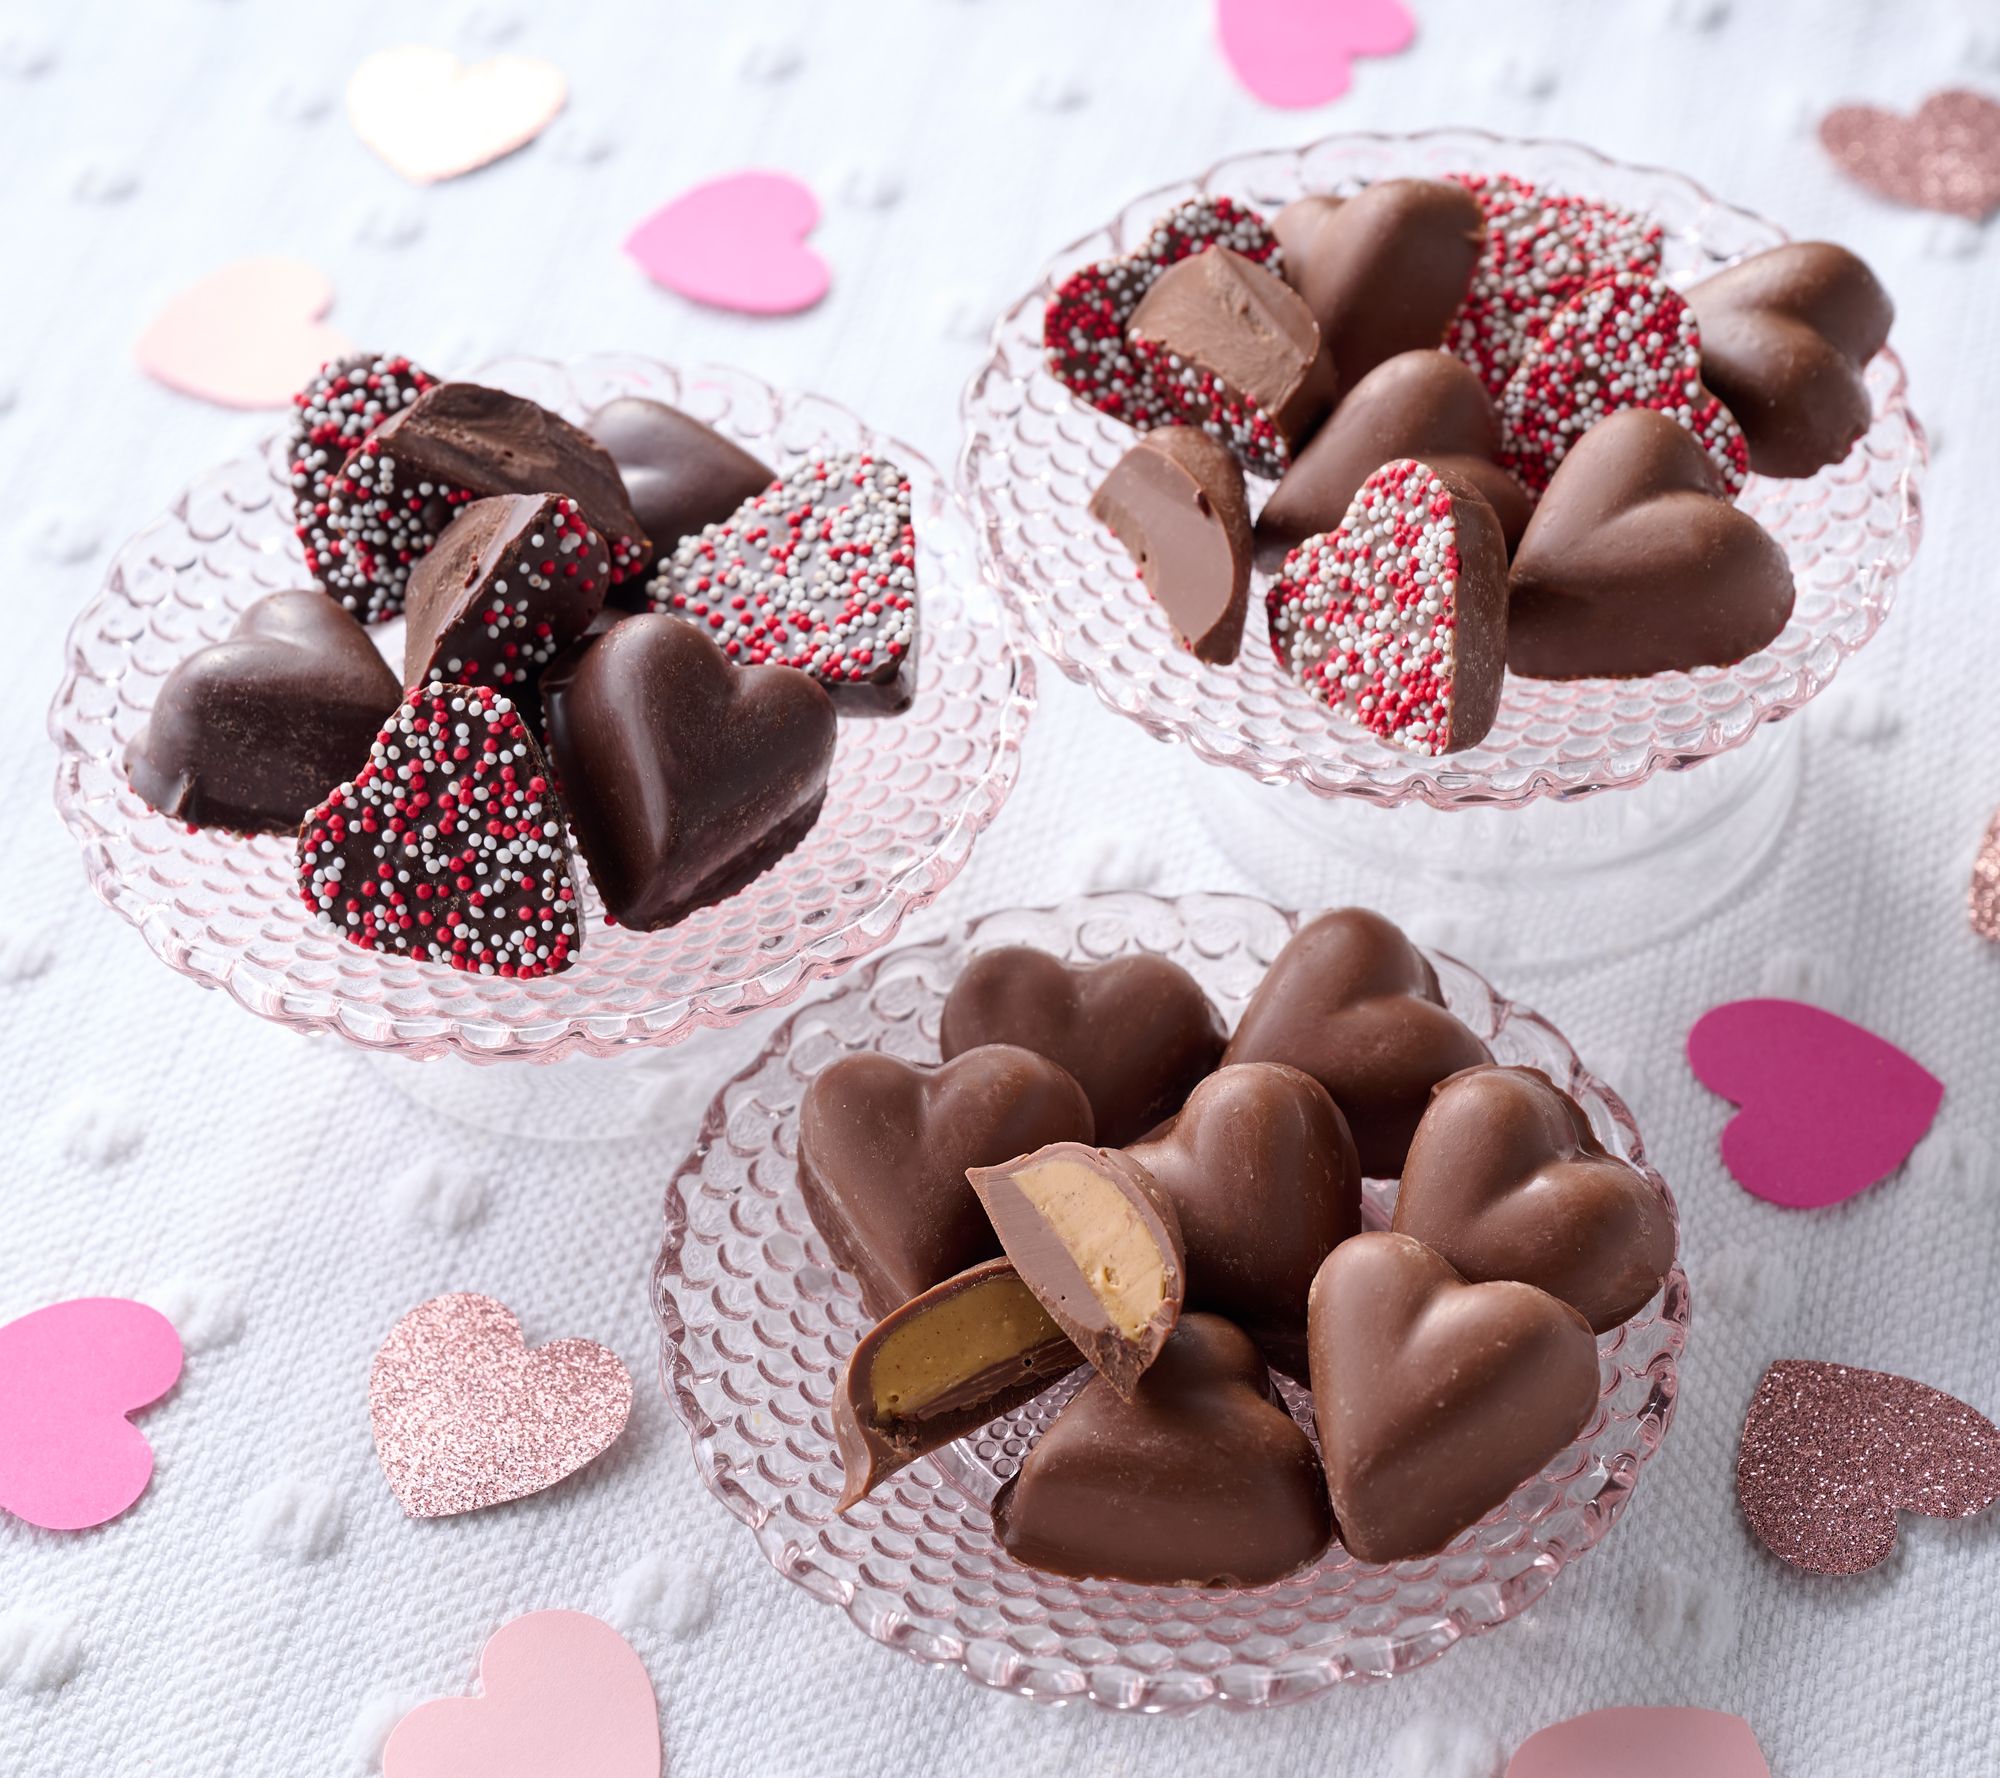 Heart-shaped Box of Chocolates - Anderson's Candies